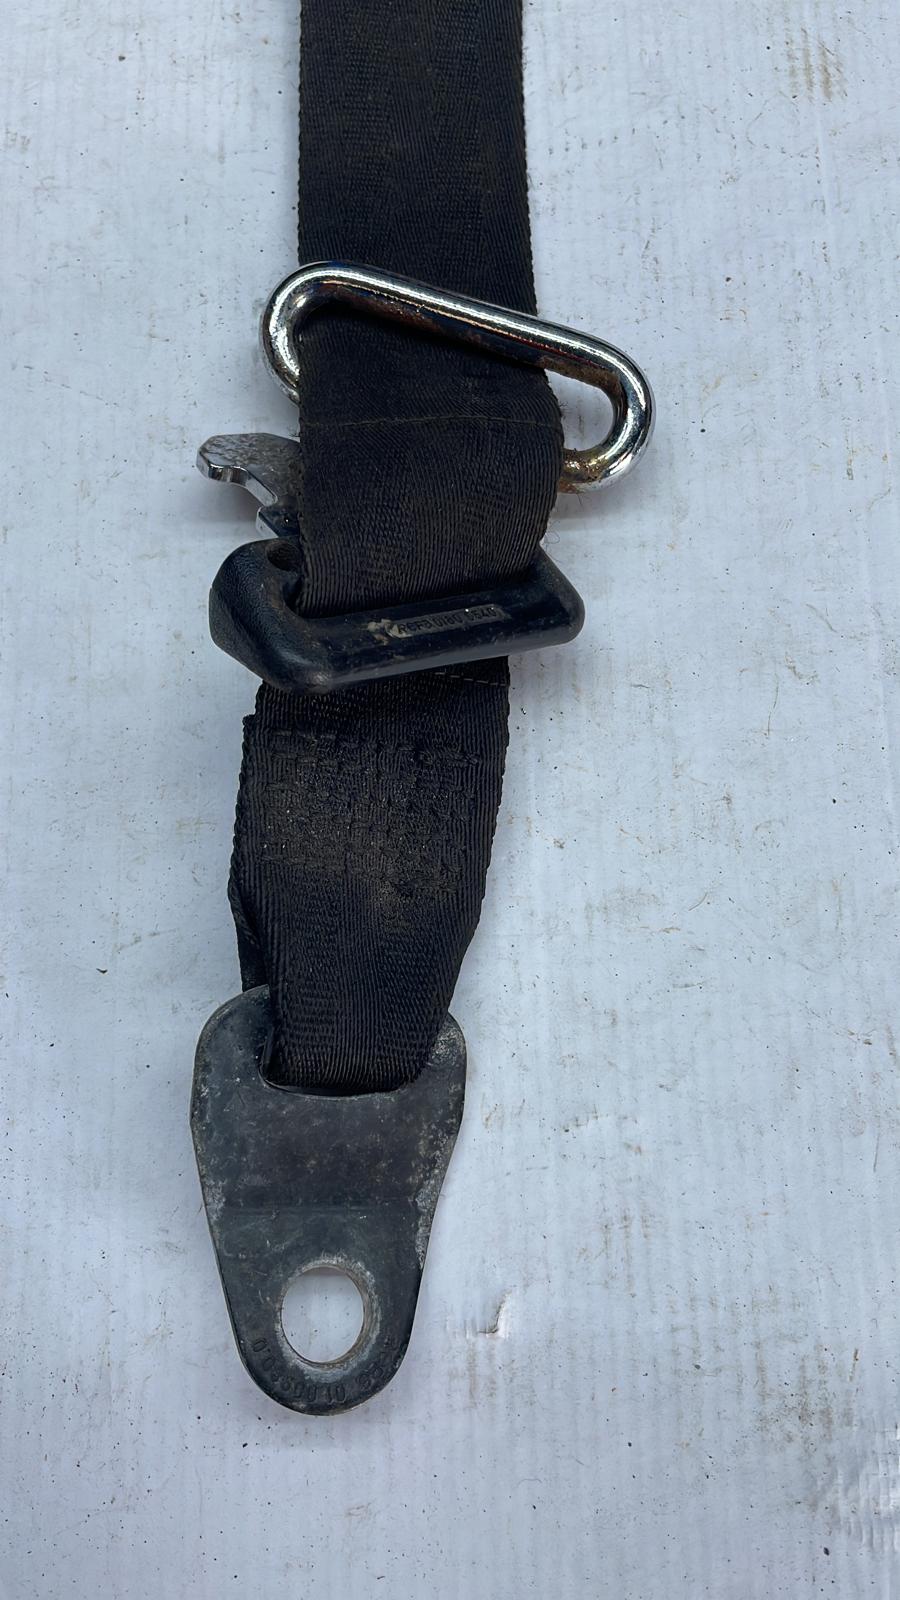 Used Porsche 924 front right seat belt with metal hanger